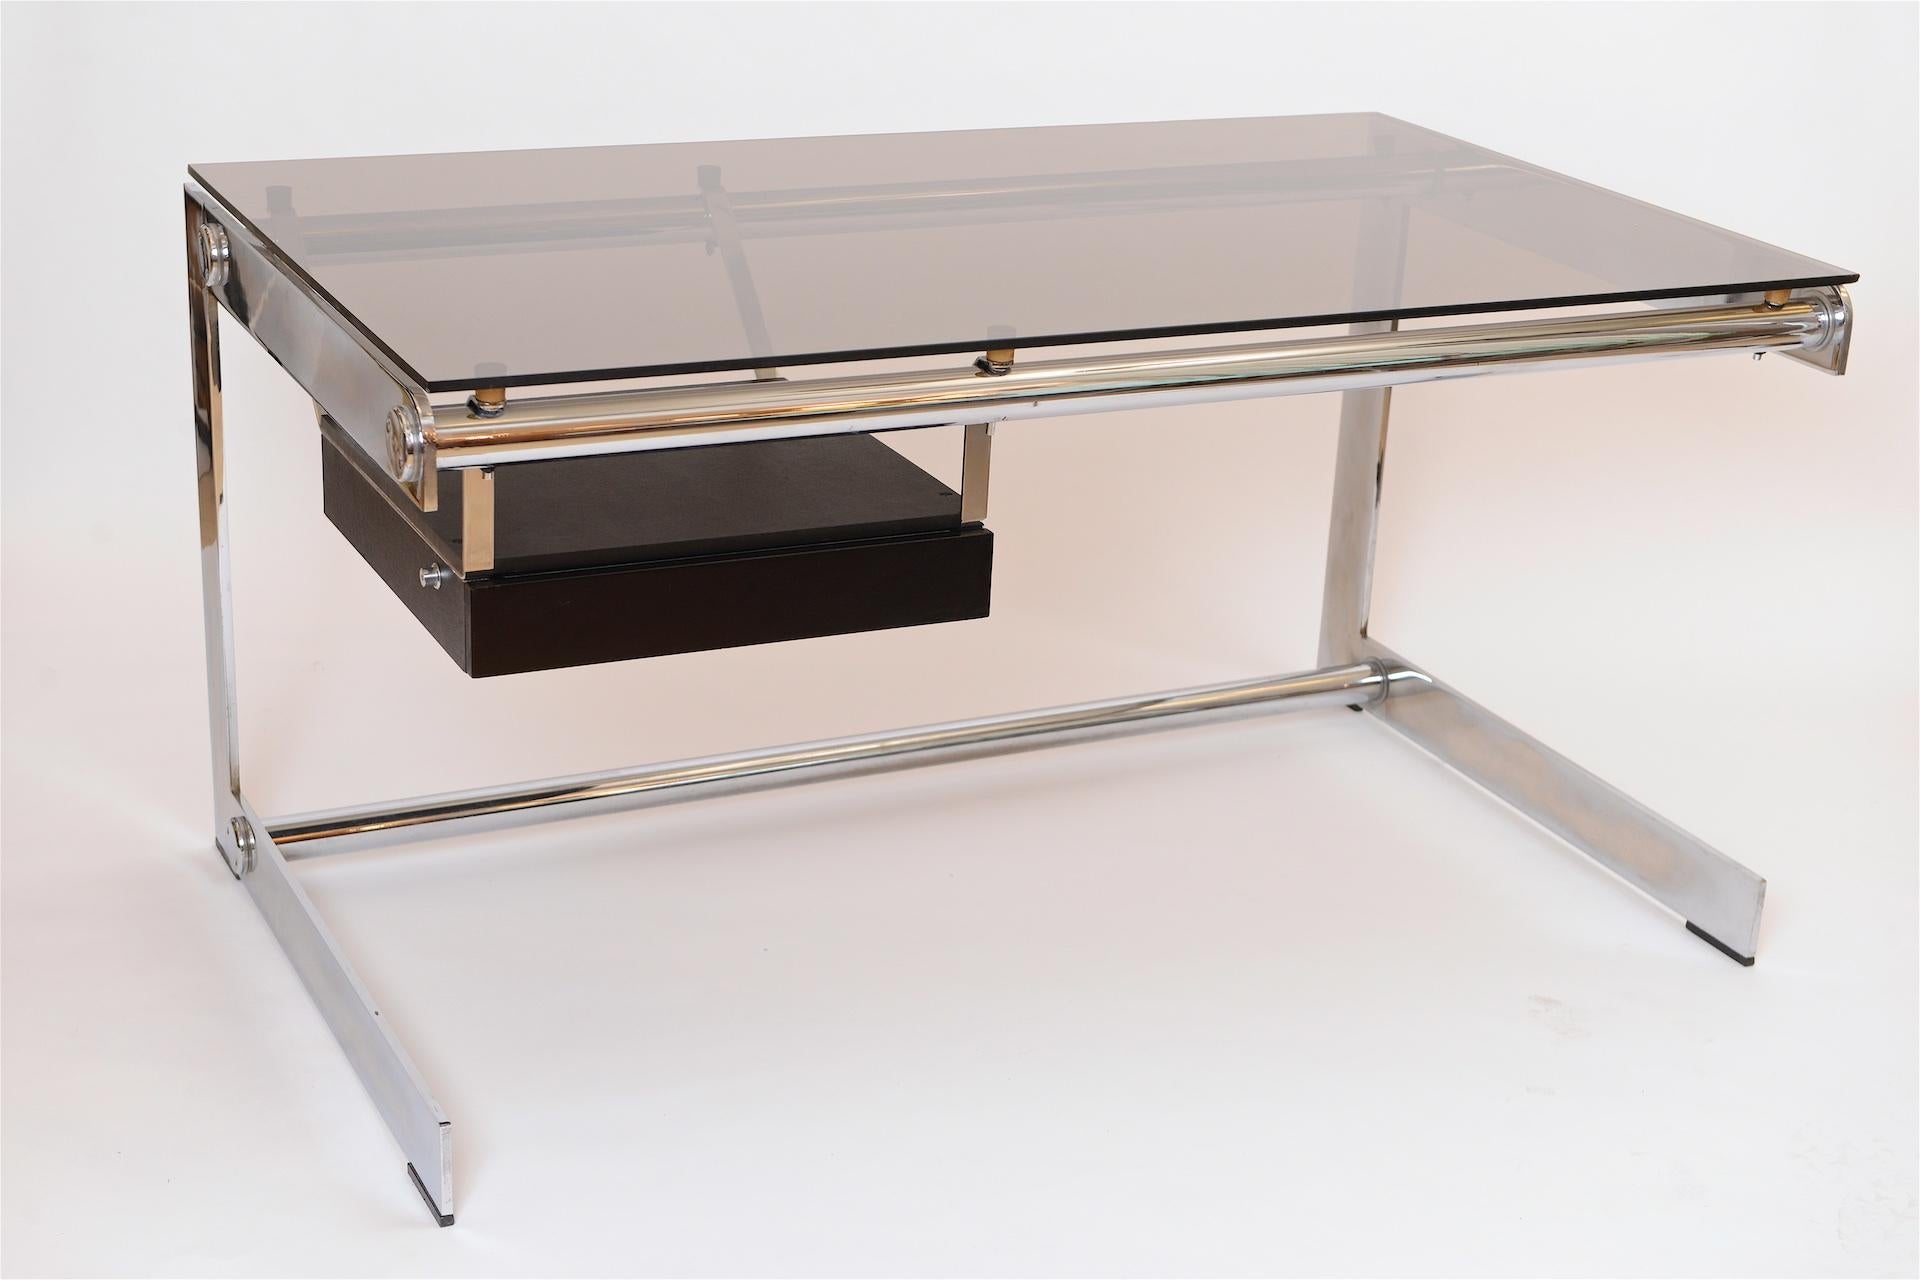 French Rare Chrome and Glass Desk by Gilles Bouchez for Airbourne, circa 1965